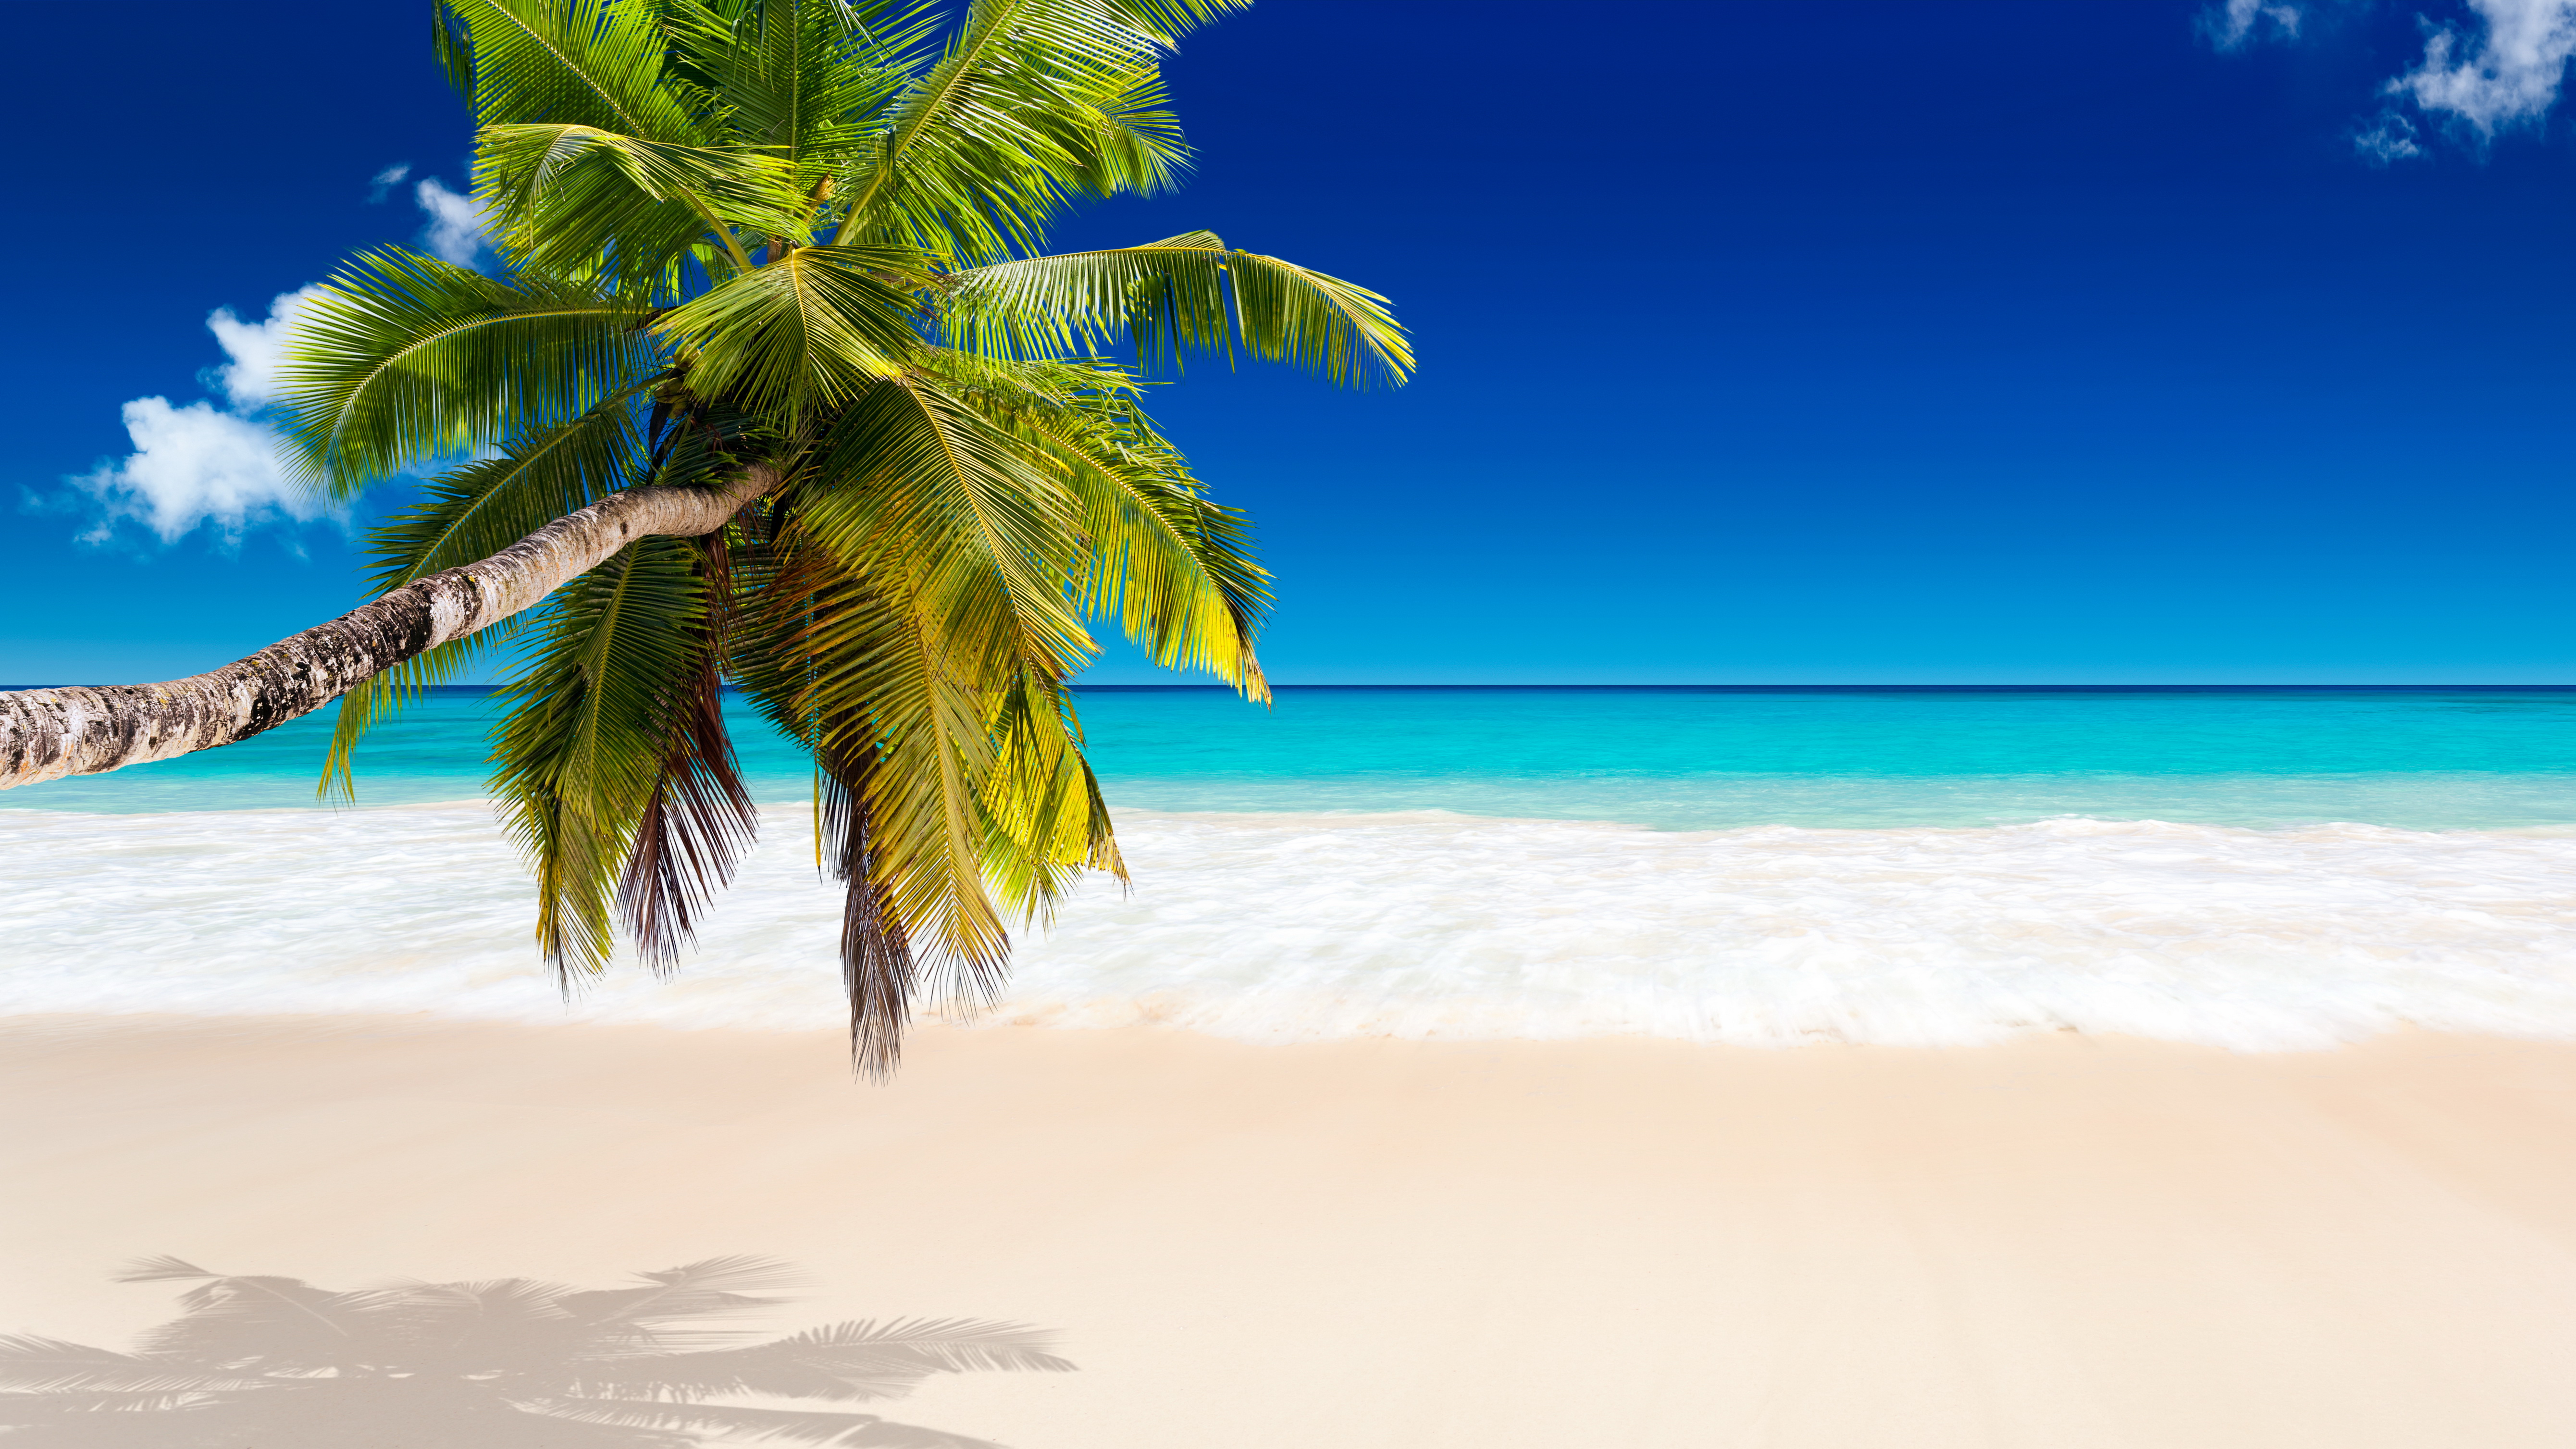 Tropical Beach Wallpapers Pictures Images 5360x3015